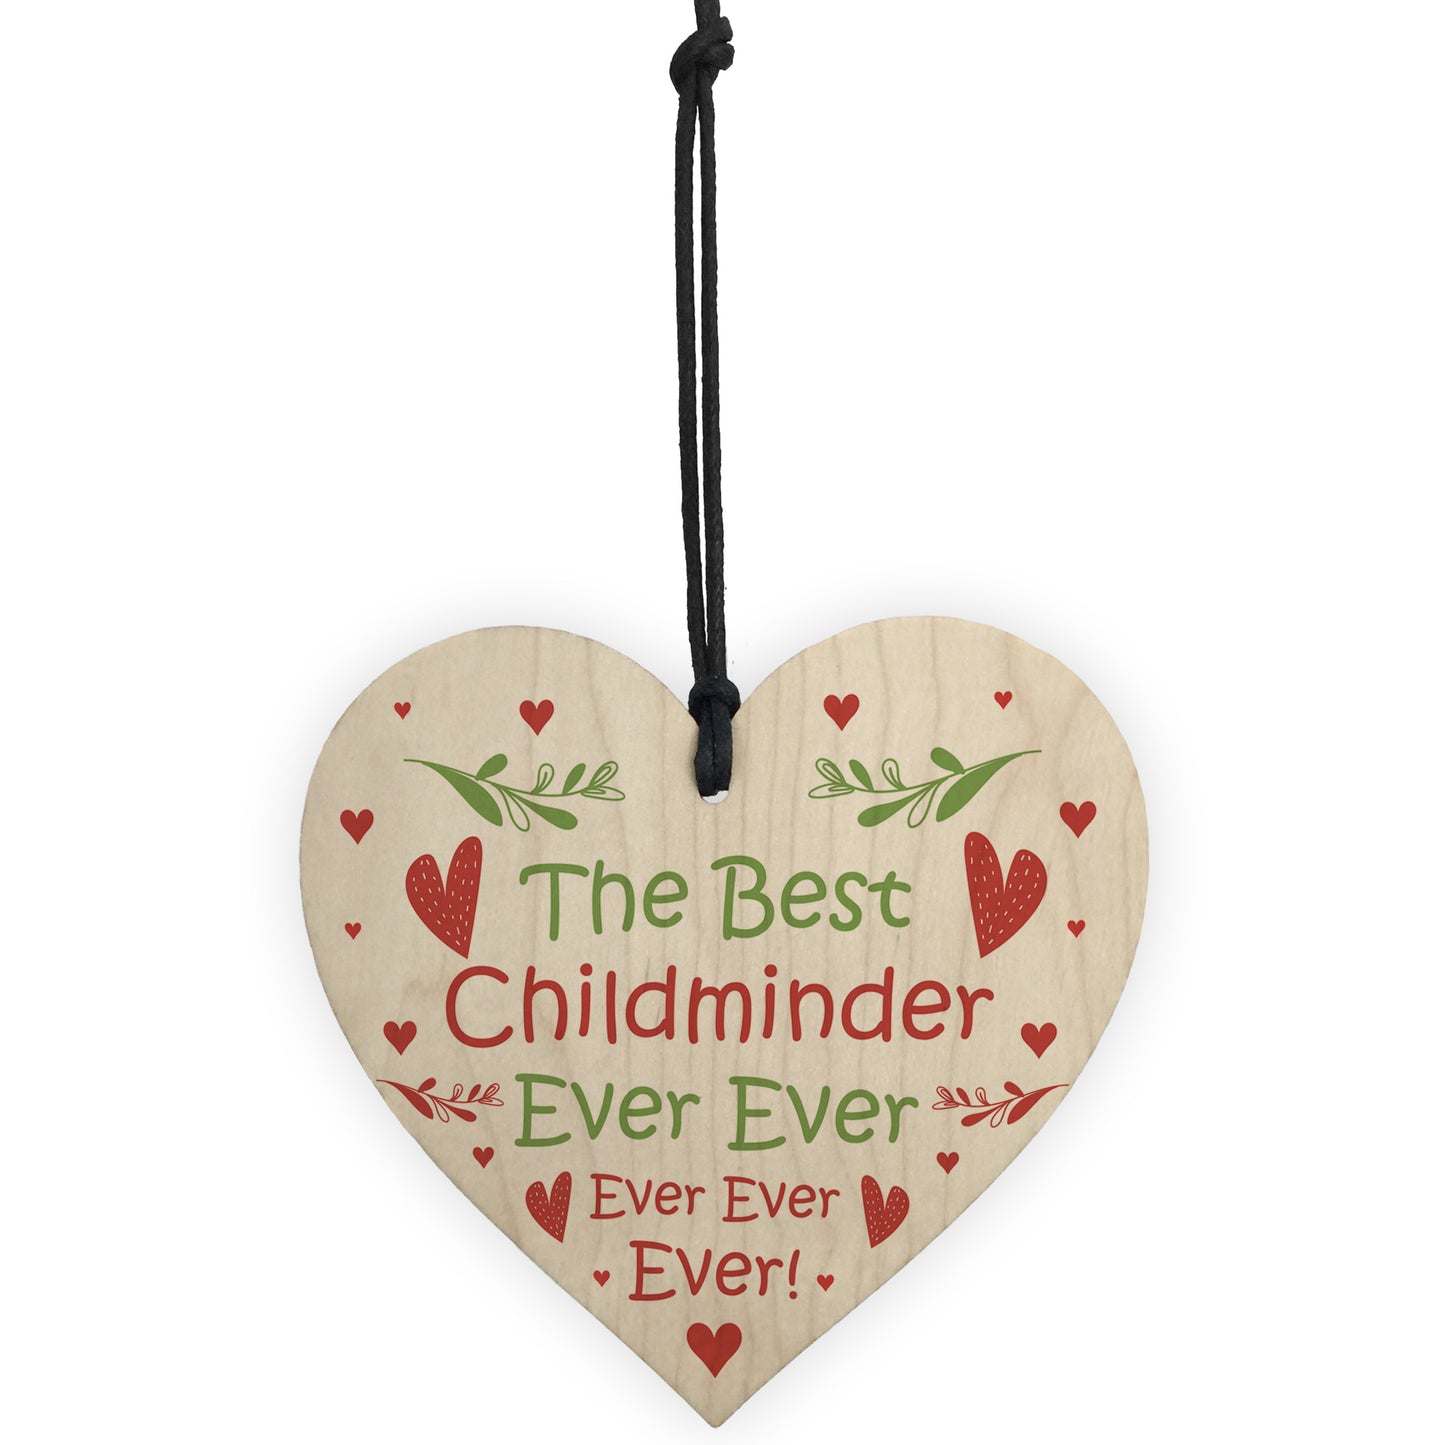 Special Thank You Gift For Childminder Teacher Friend Wood Heart